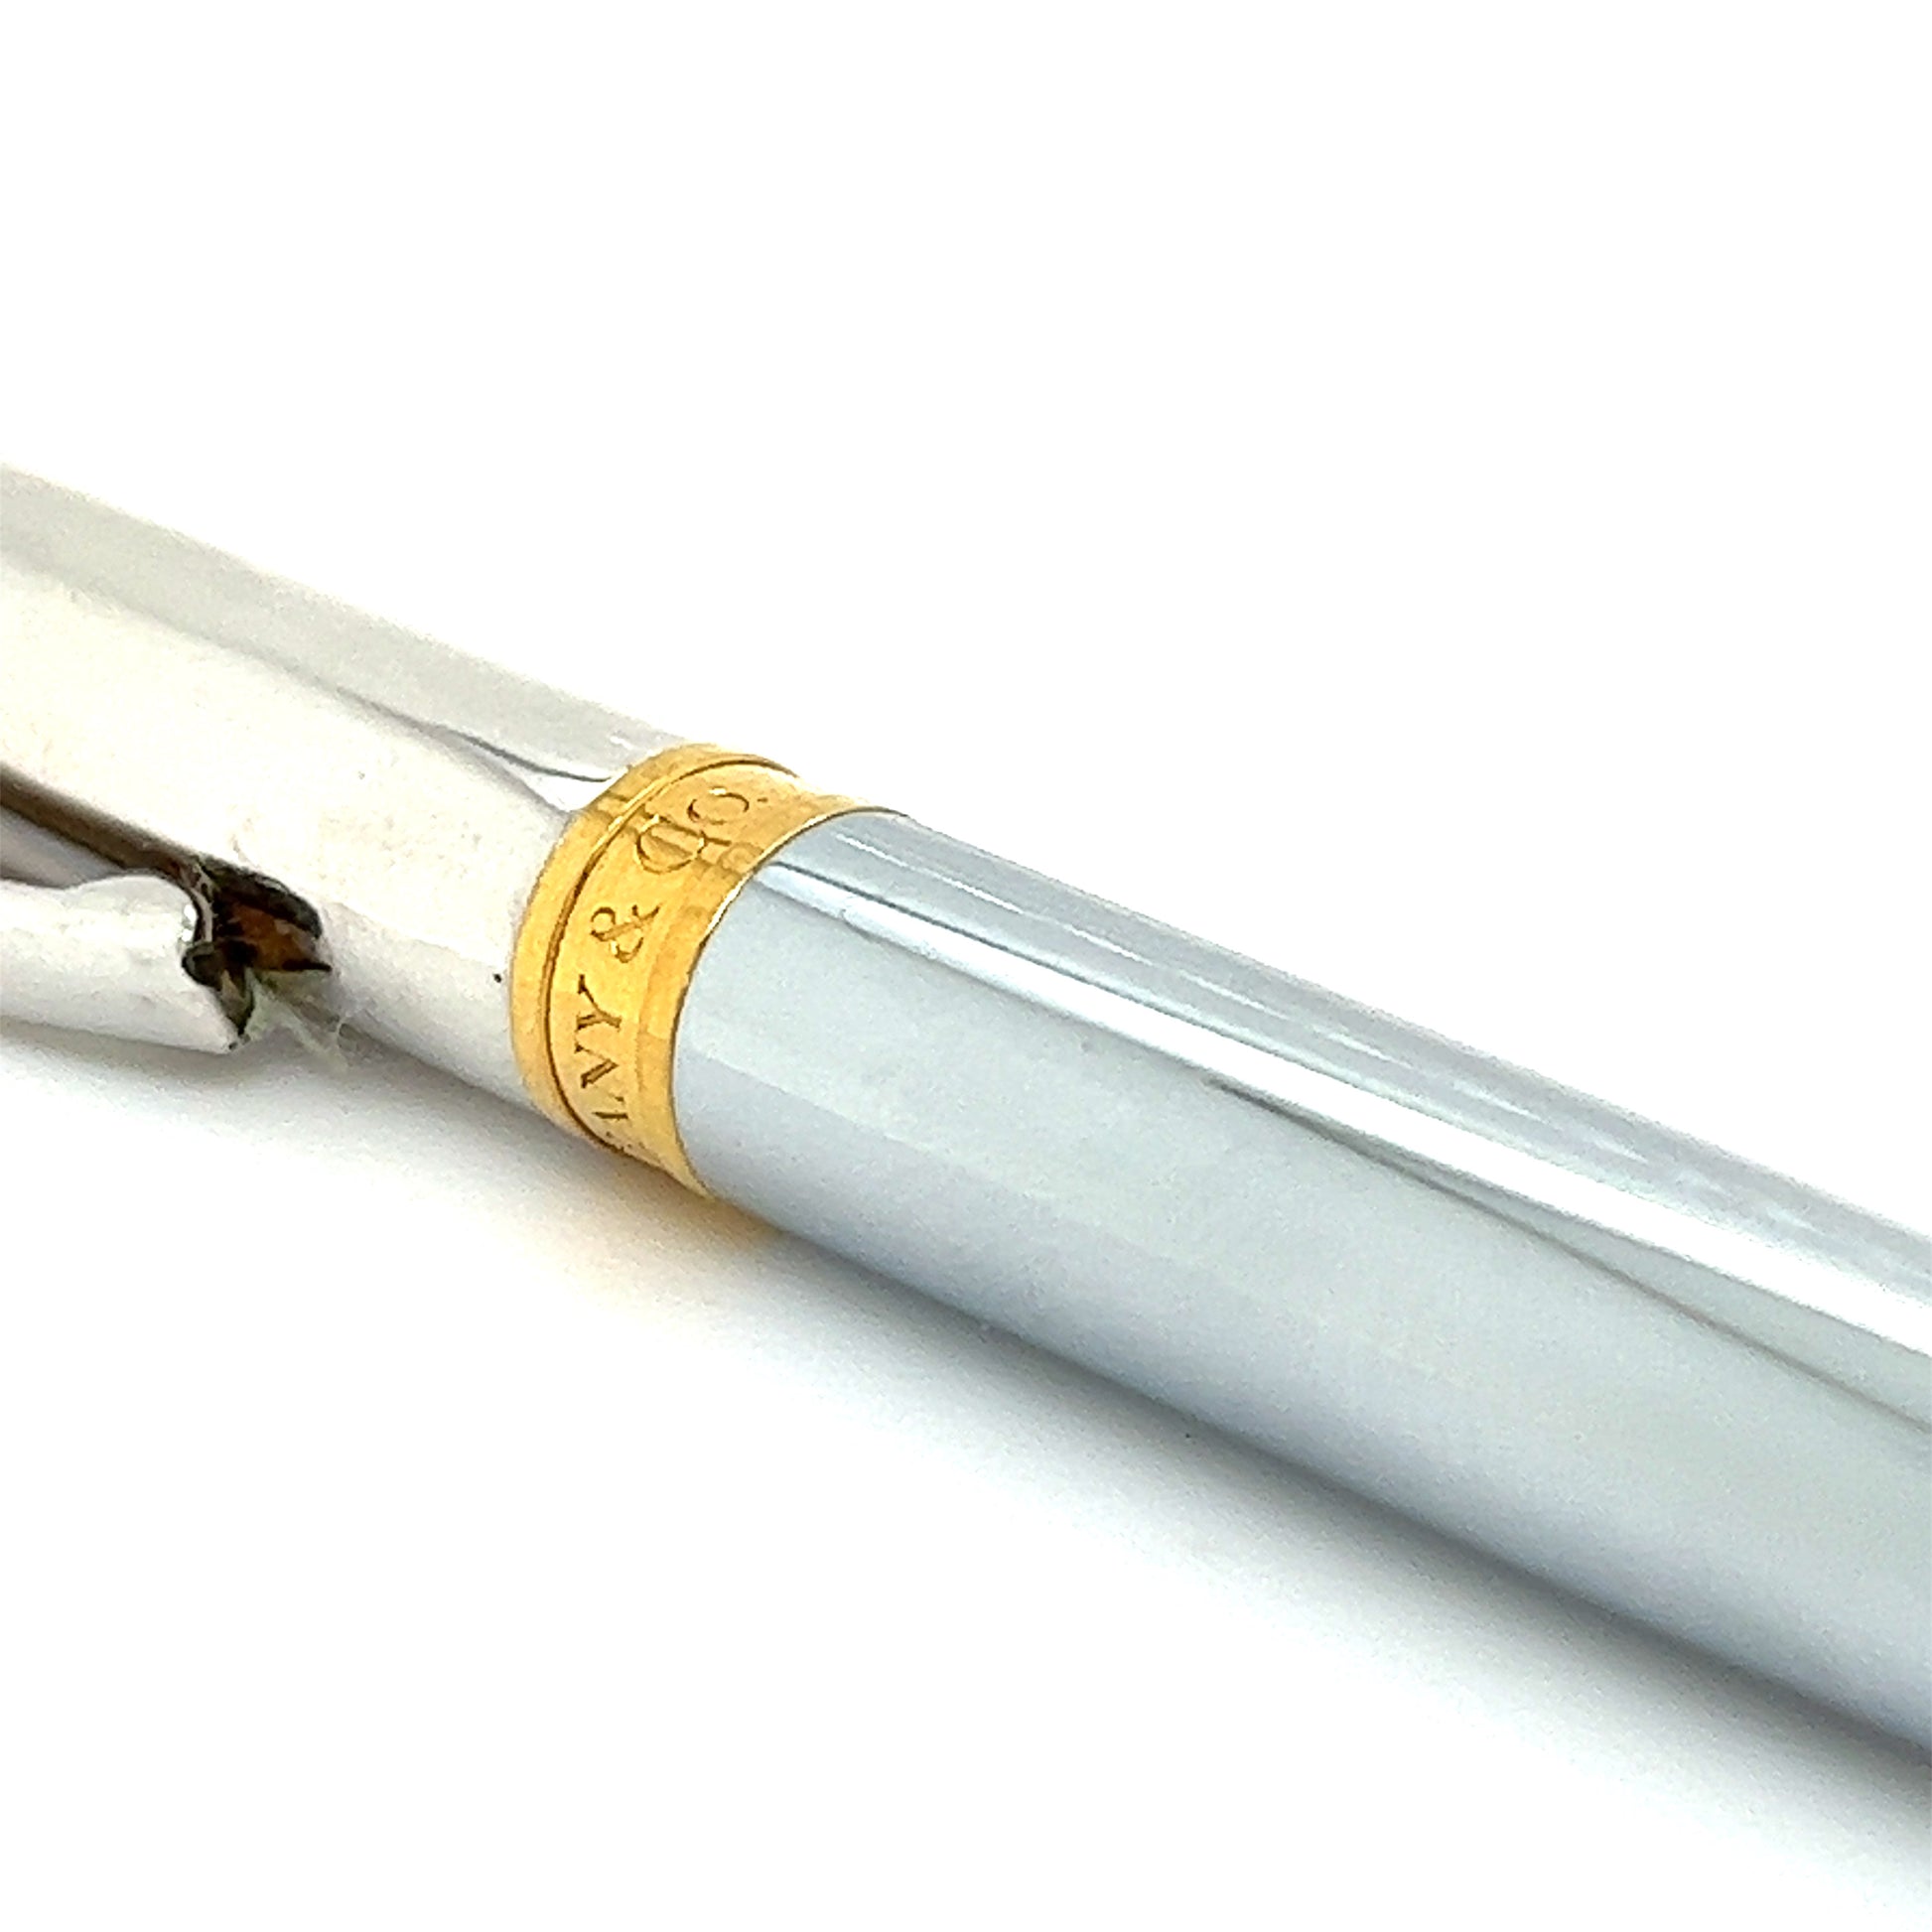 Tiffany & Co Gold Plated Ballpoint Pen 5.25" Sterling Silver TIF272